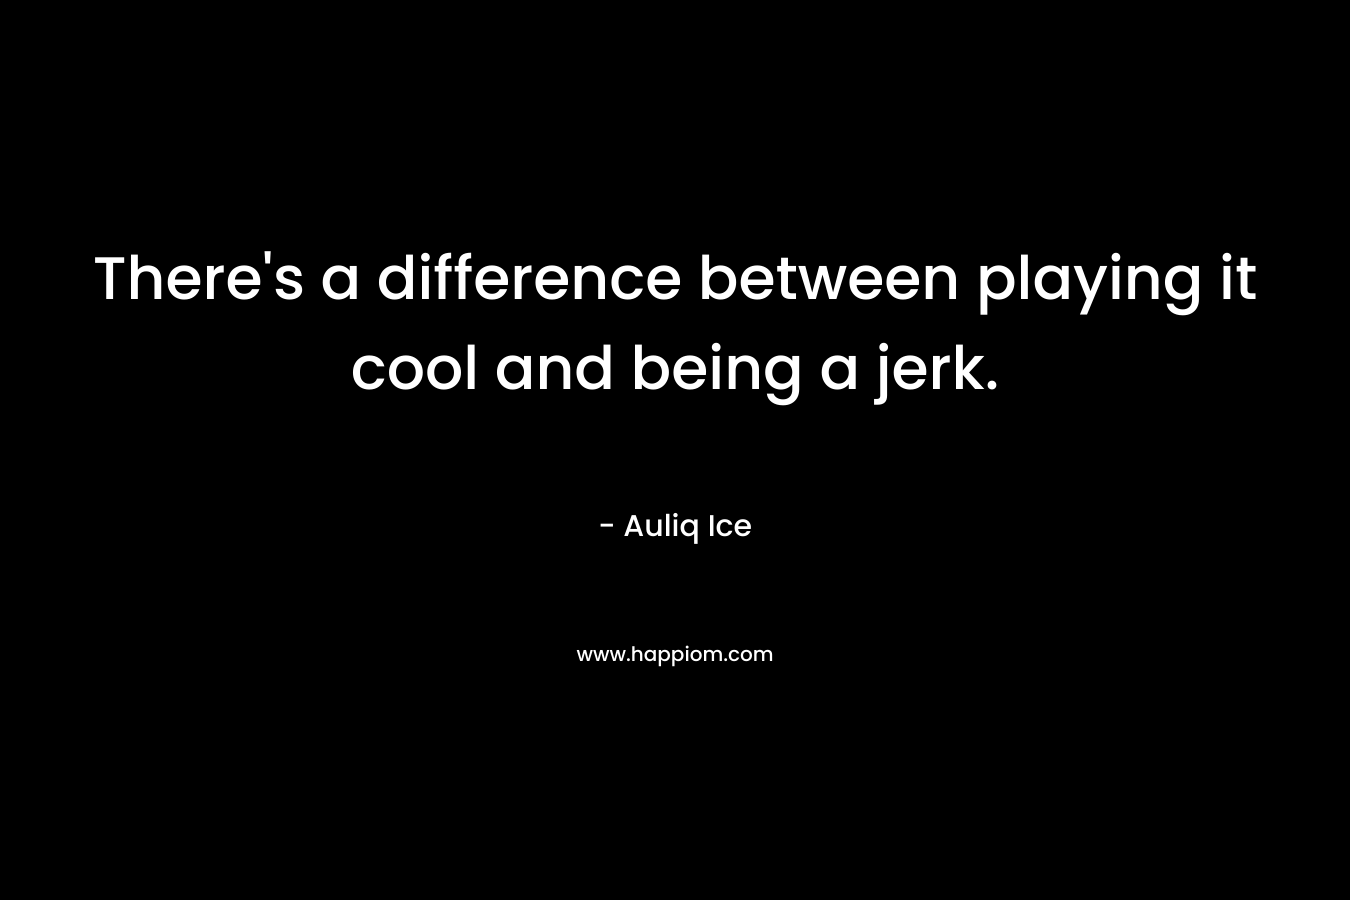 There's a difference between playing it cool and being a jerk.